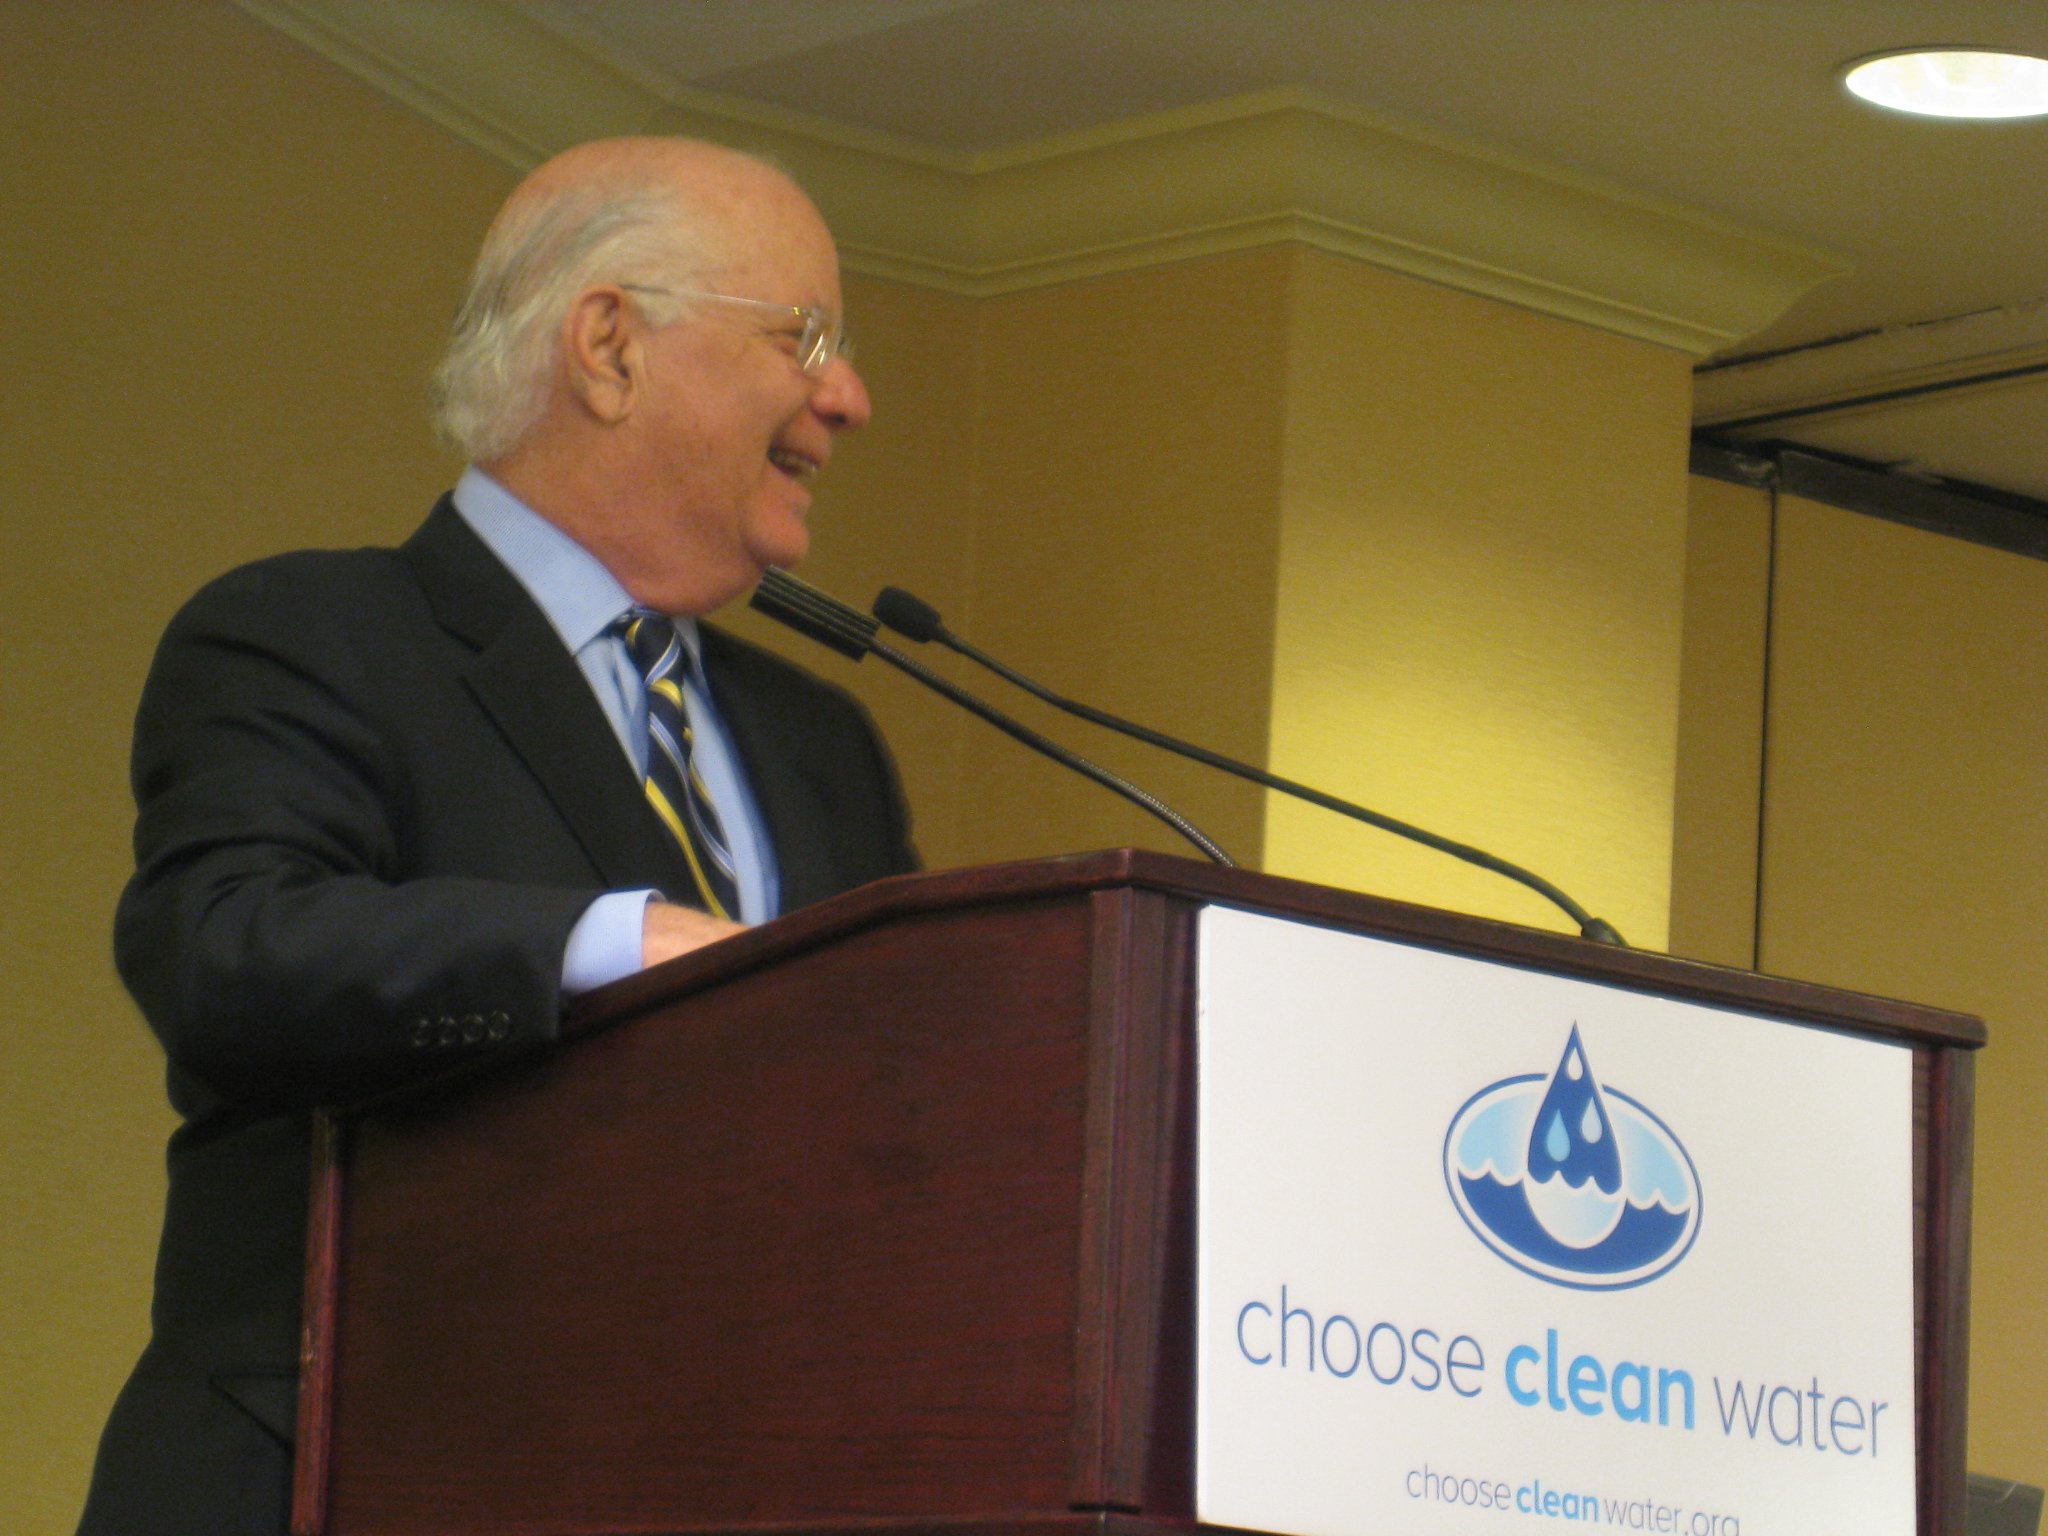  Senator Cardin at the first annual Choose Clean Water Conference in 2010 